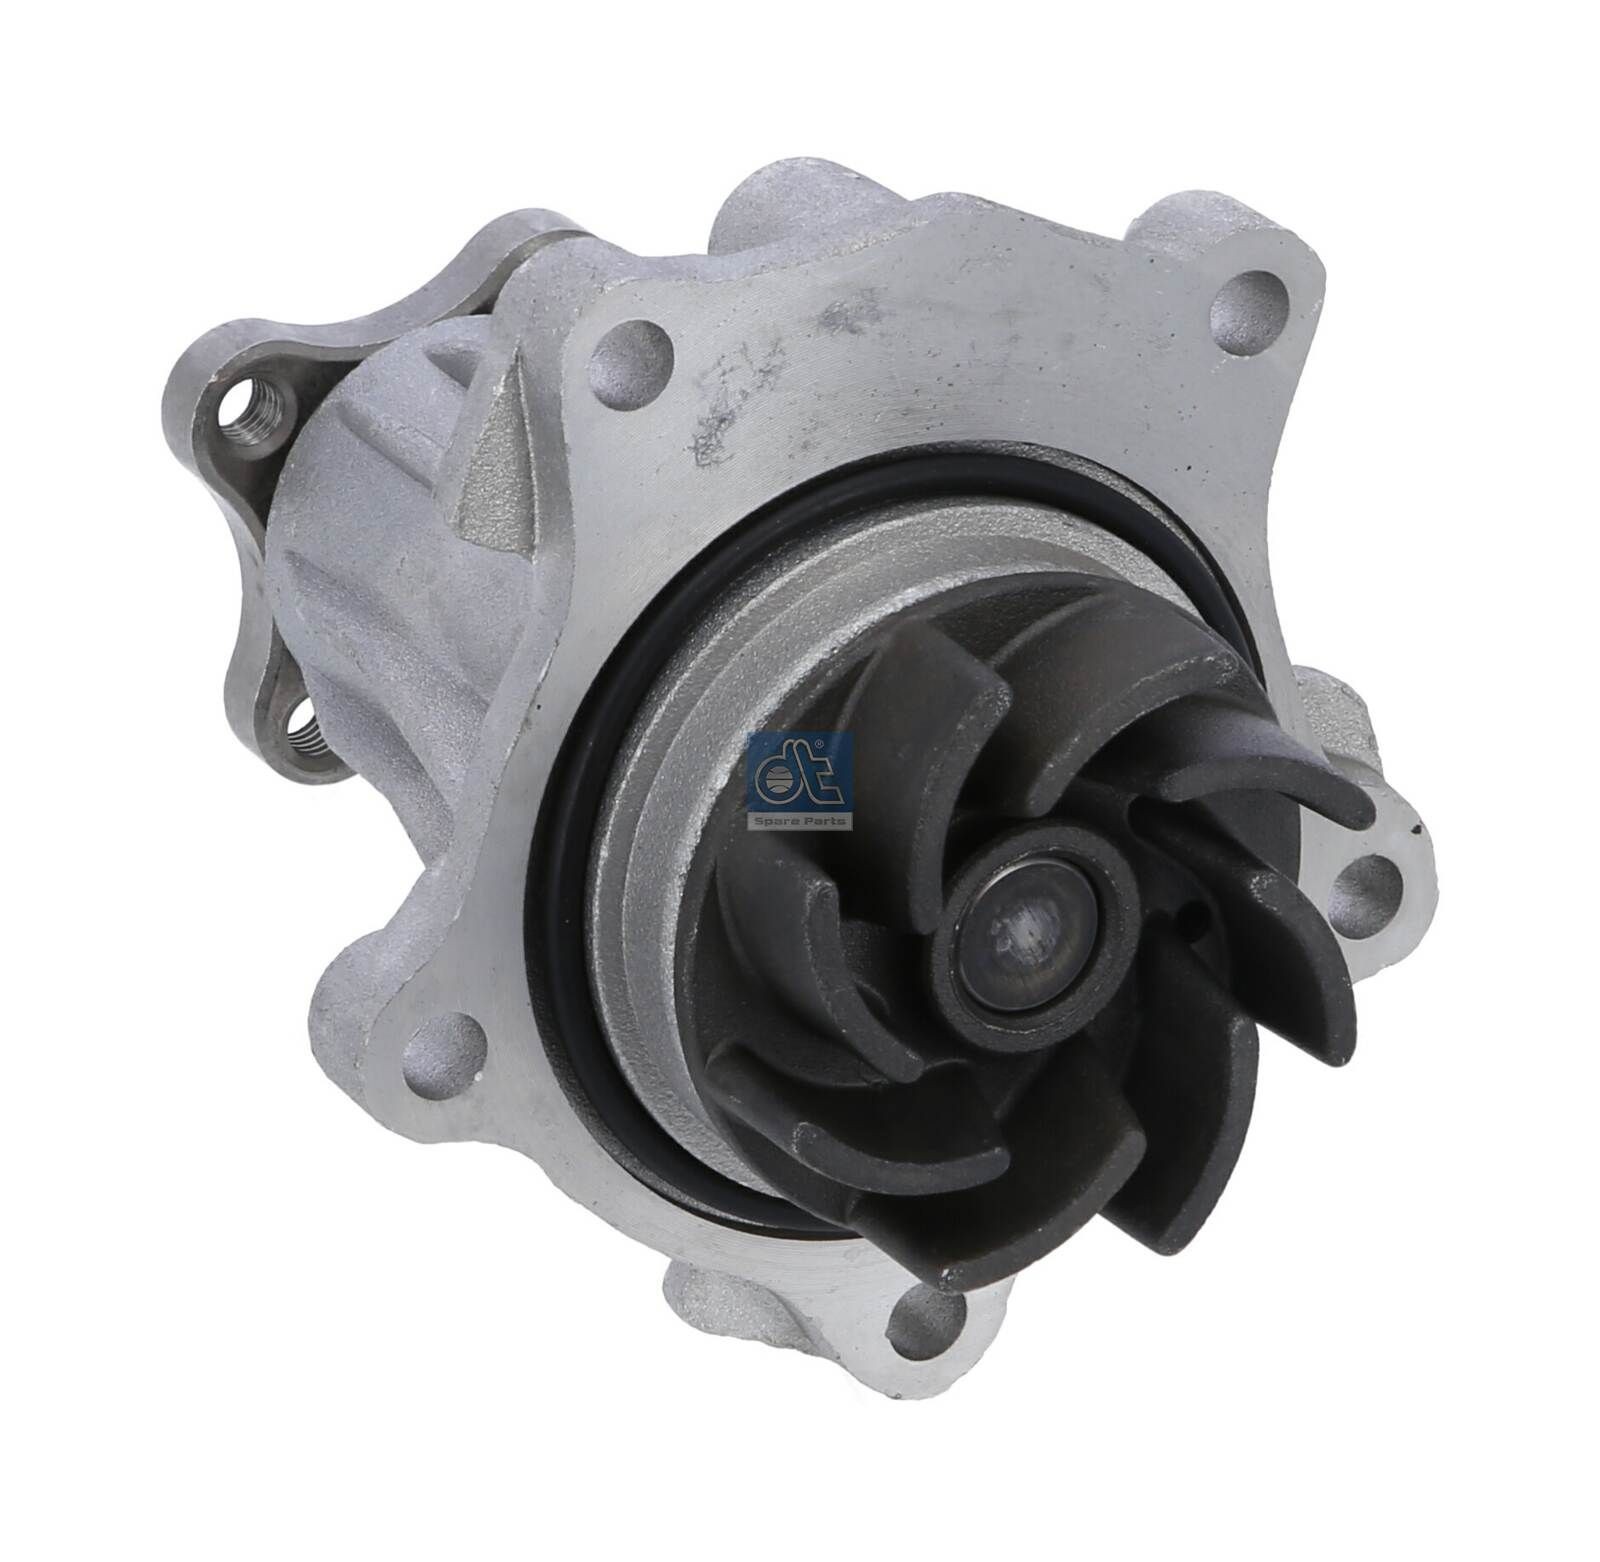 Ford KUGA Engine water pump 8940117 DT Spare Parts 13.42053 online buy